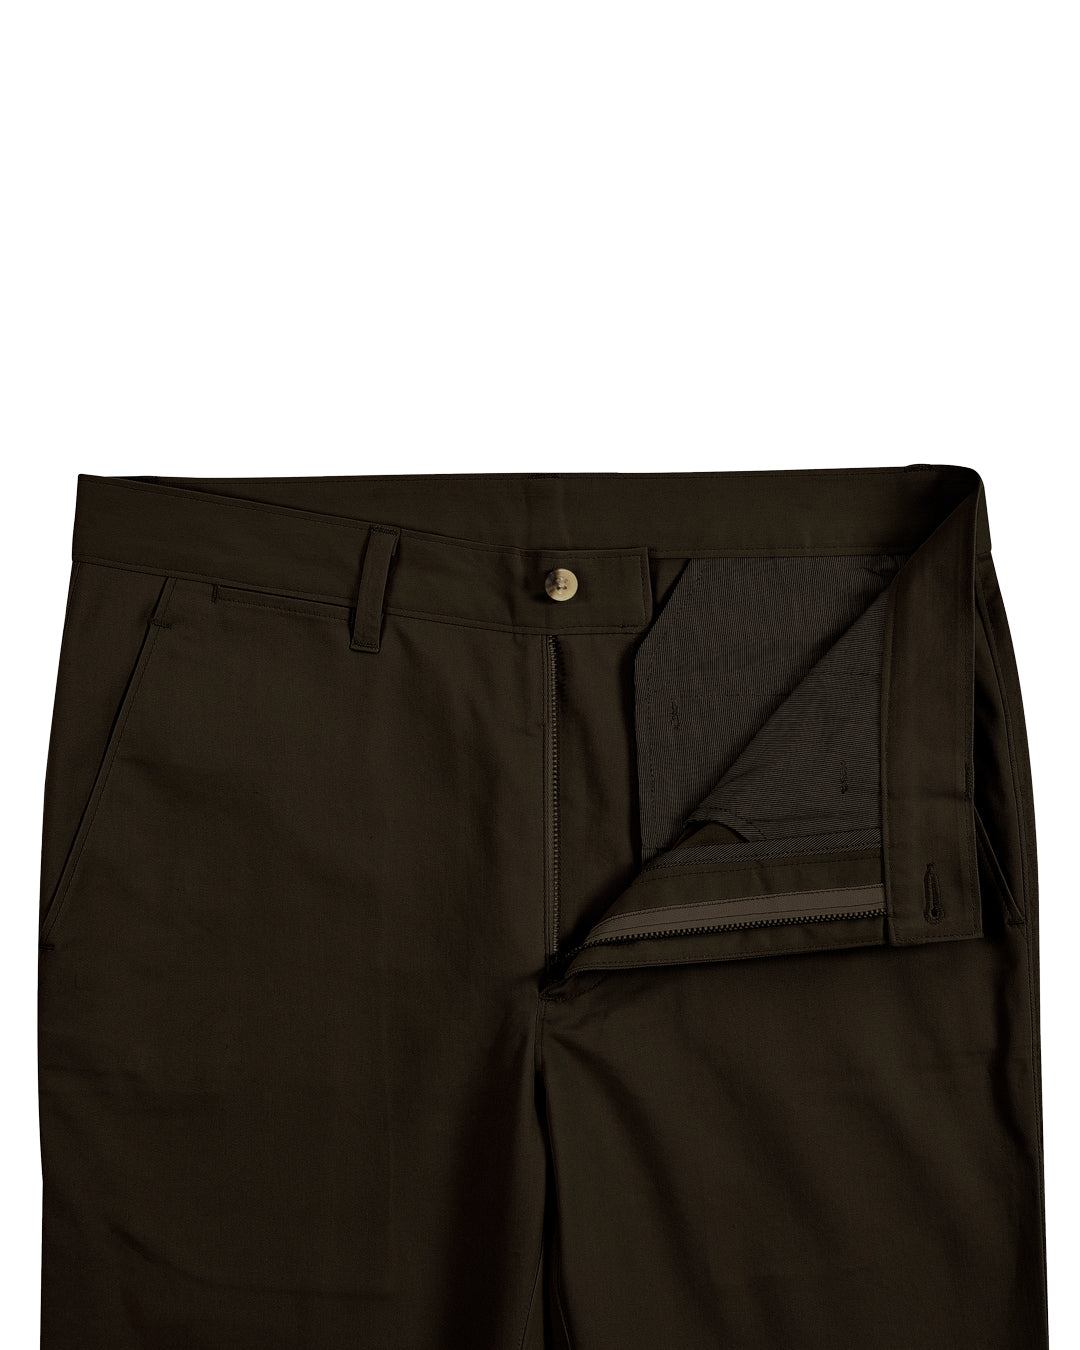 Open front view of custom Genoa Chino pants for men by Luxire in dark brown chocolate